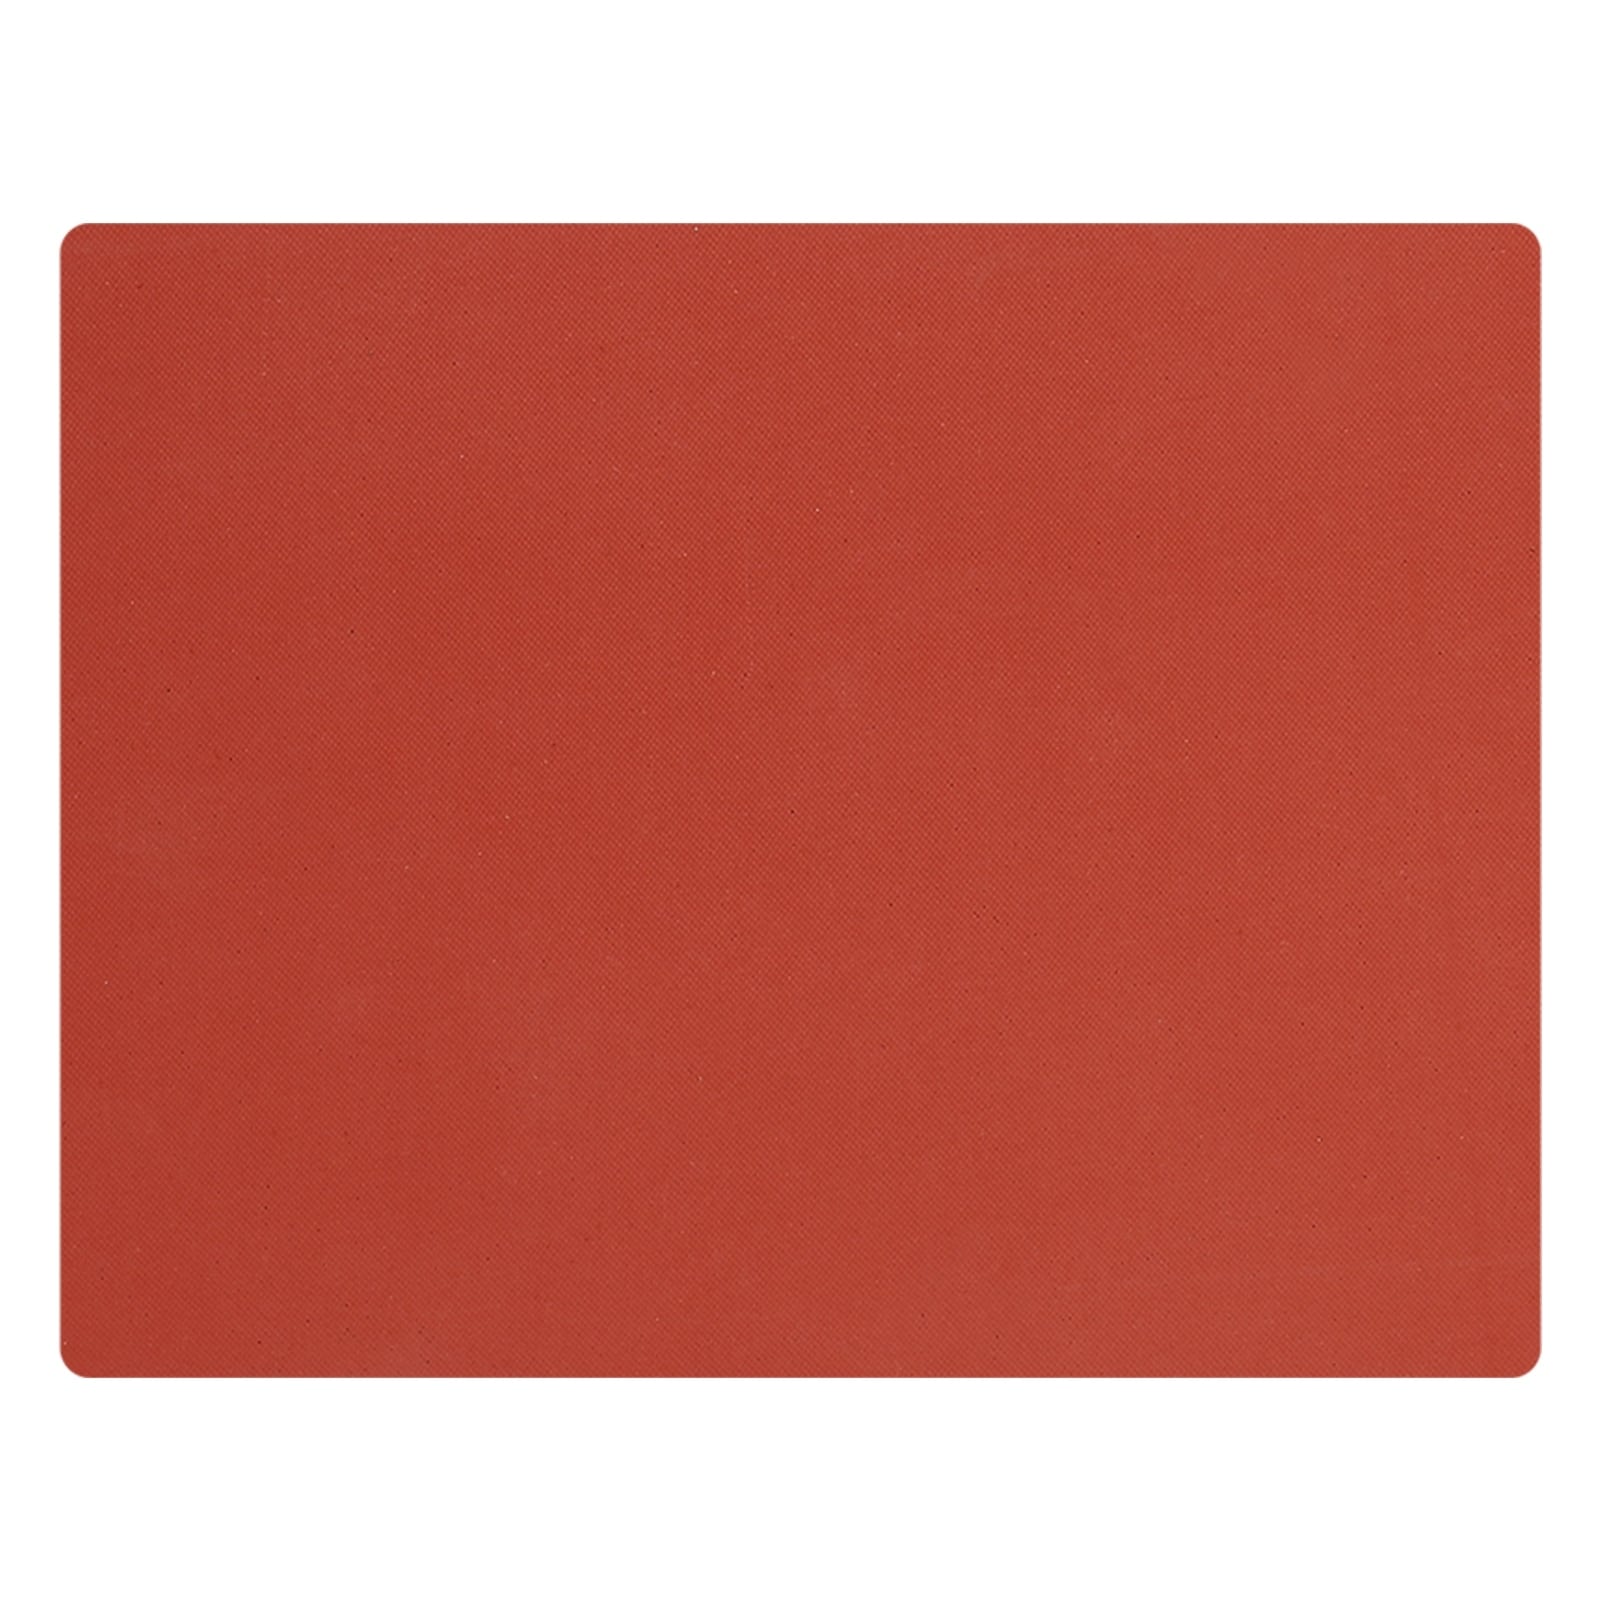 10 x 7.7 Silicone Heat Press Pad Mat 0.3 Thick for Heat Press Machine -  Red - On Sale - Bed Bath & Beyond - 37885481